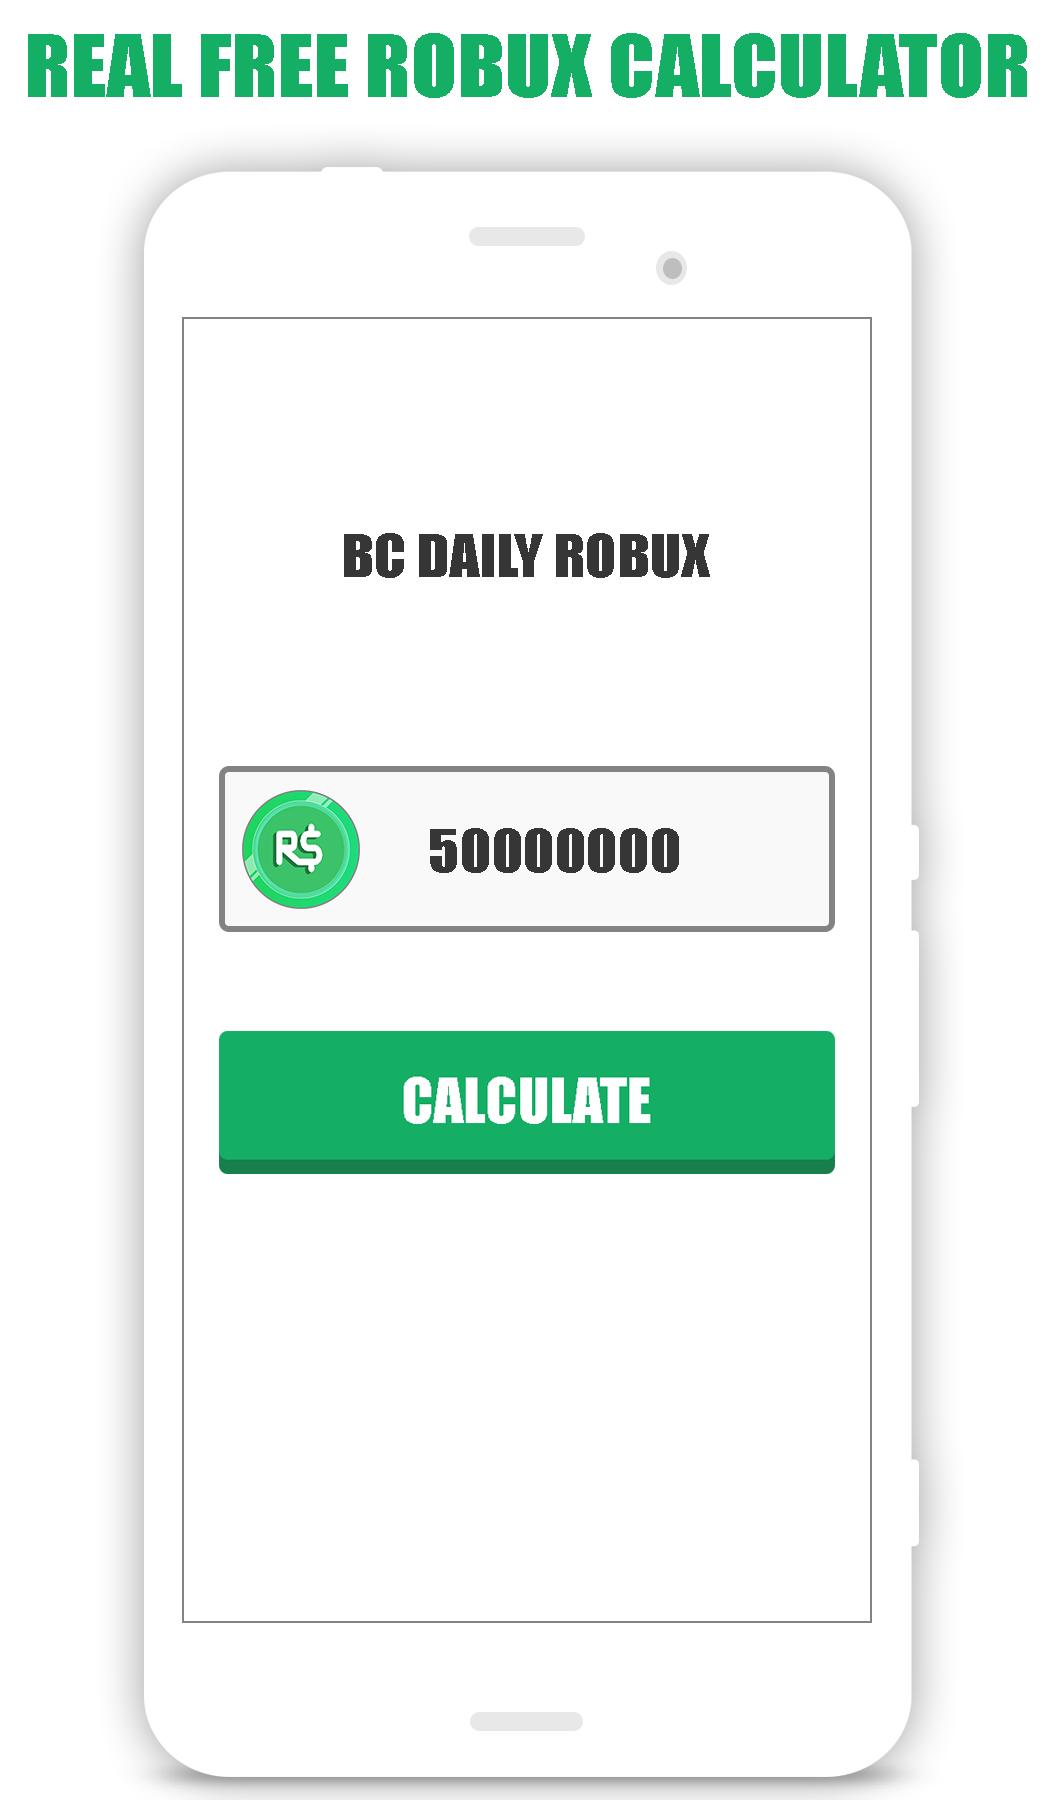 download free robux calculator for rblox rbx magnet apk latest version app by sundwish for android devices